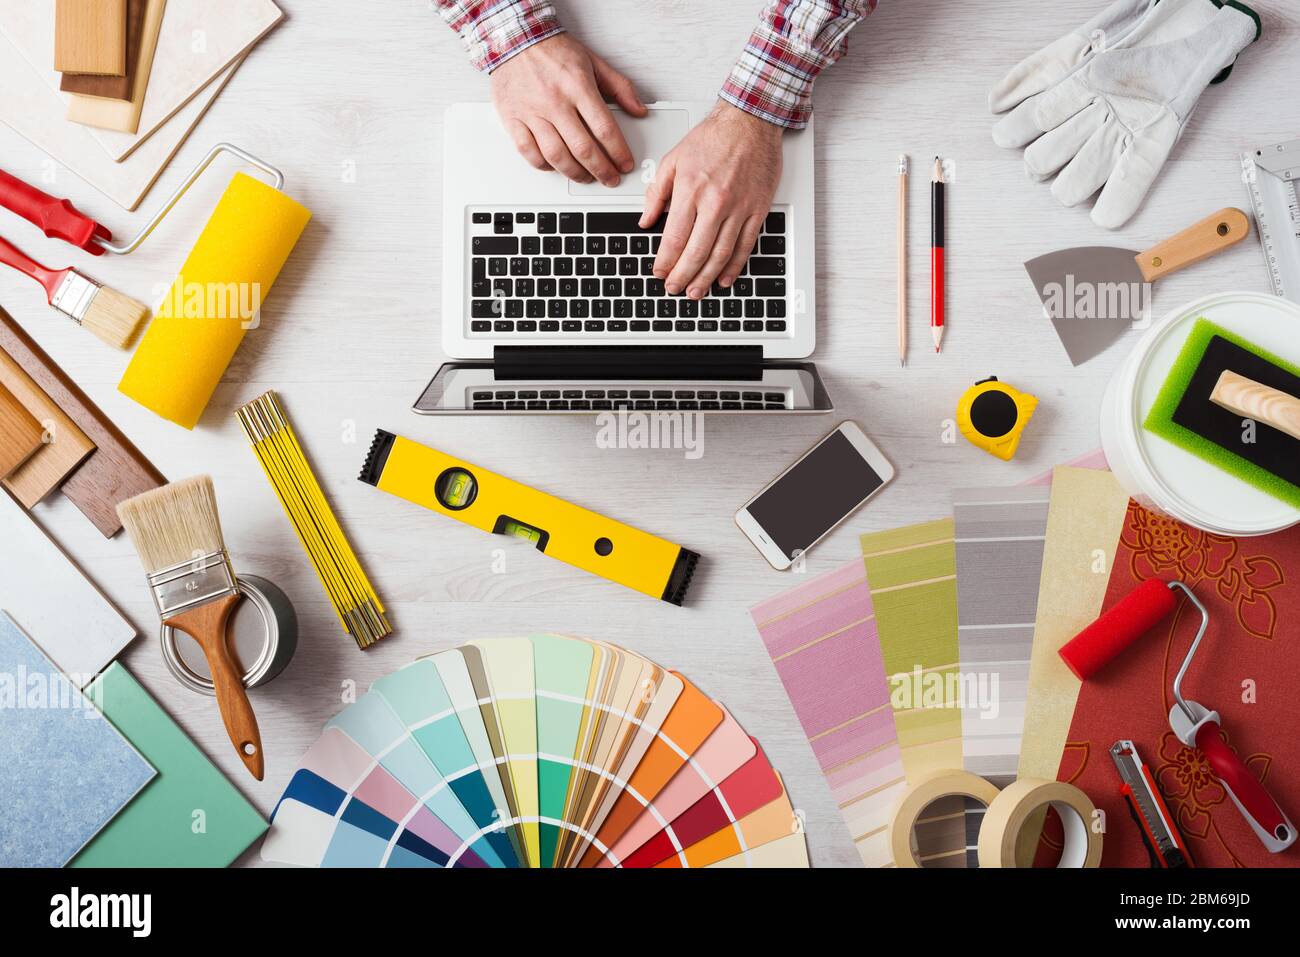 Professional decorator's hands working at his desk and typing on a laptop, color swatches, paint rollers and tools on work table, top view Stock Photo